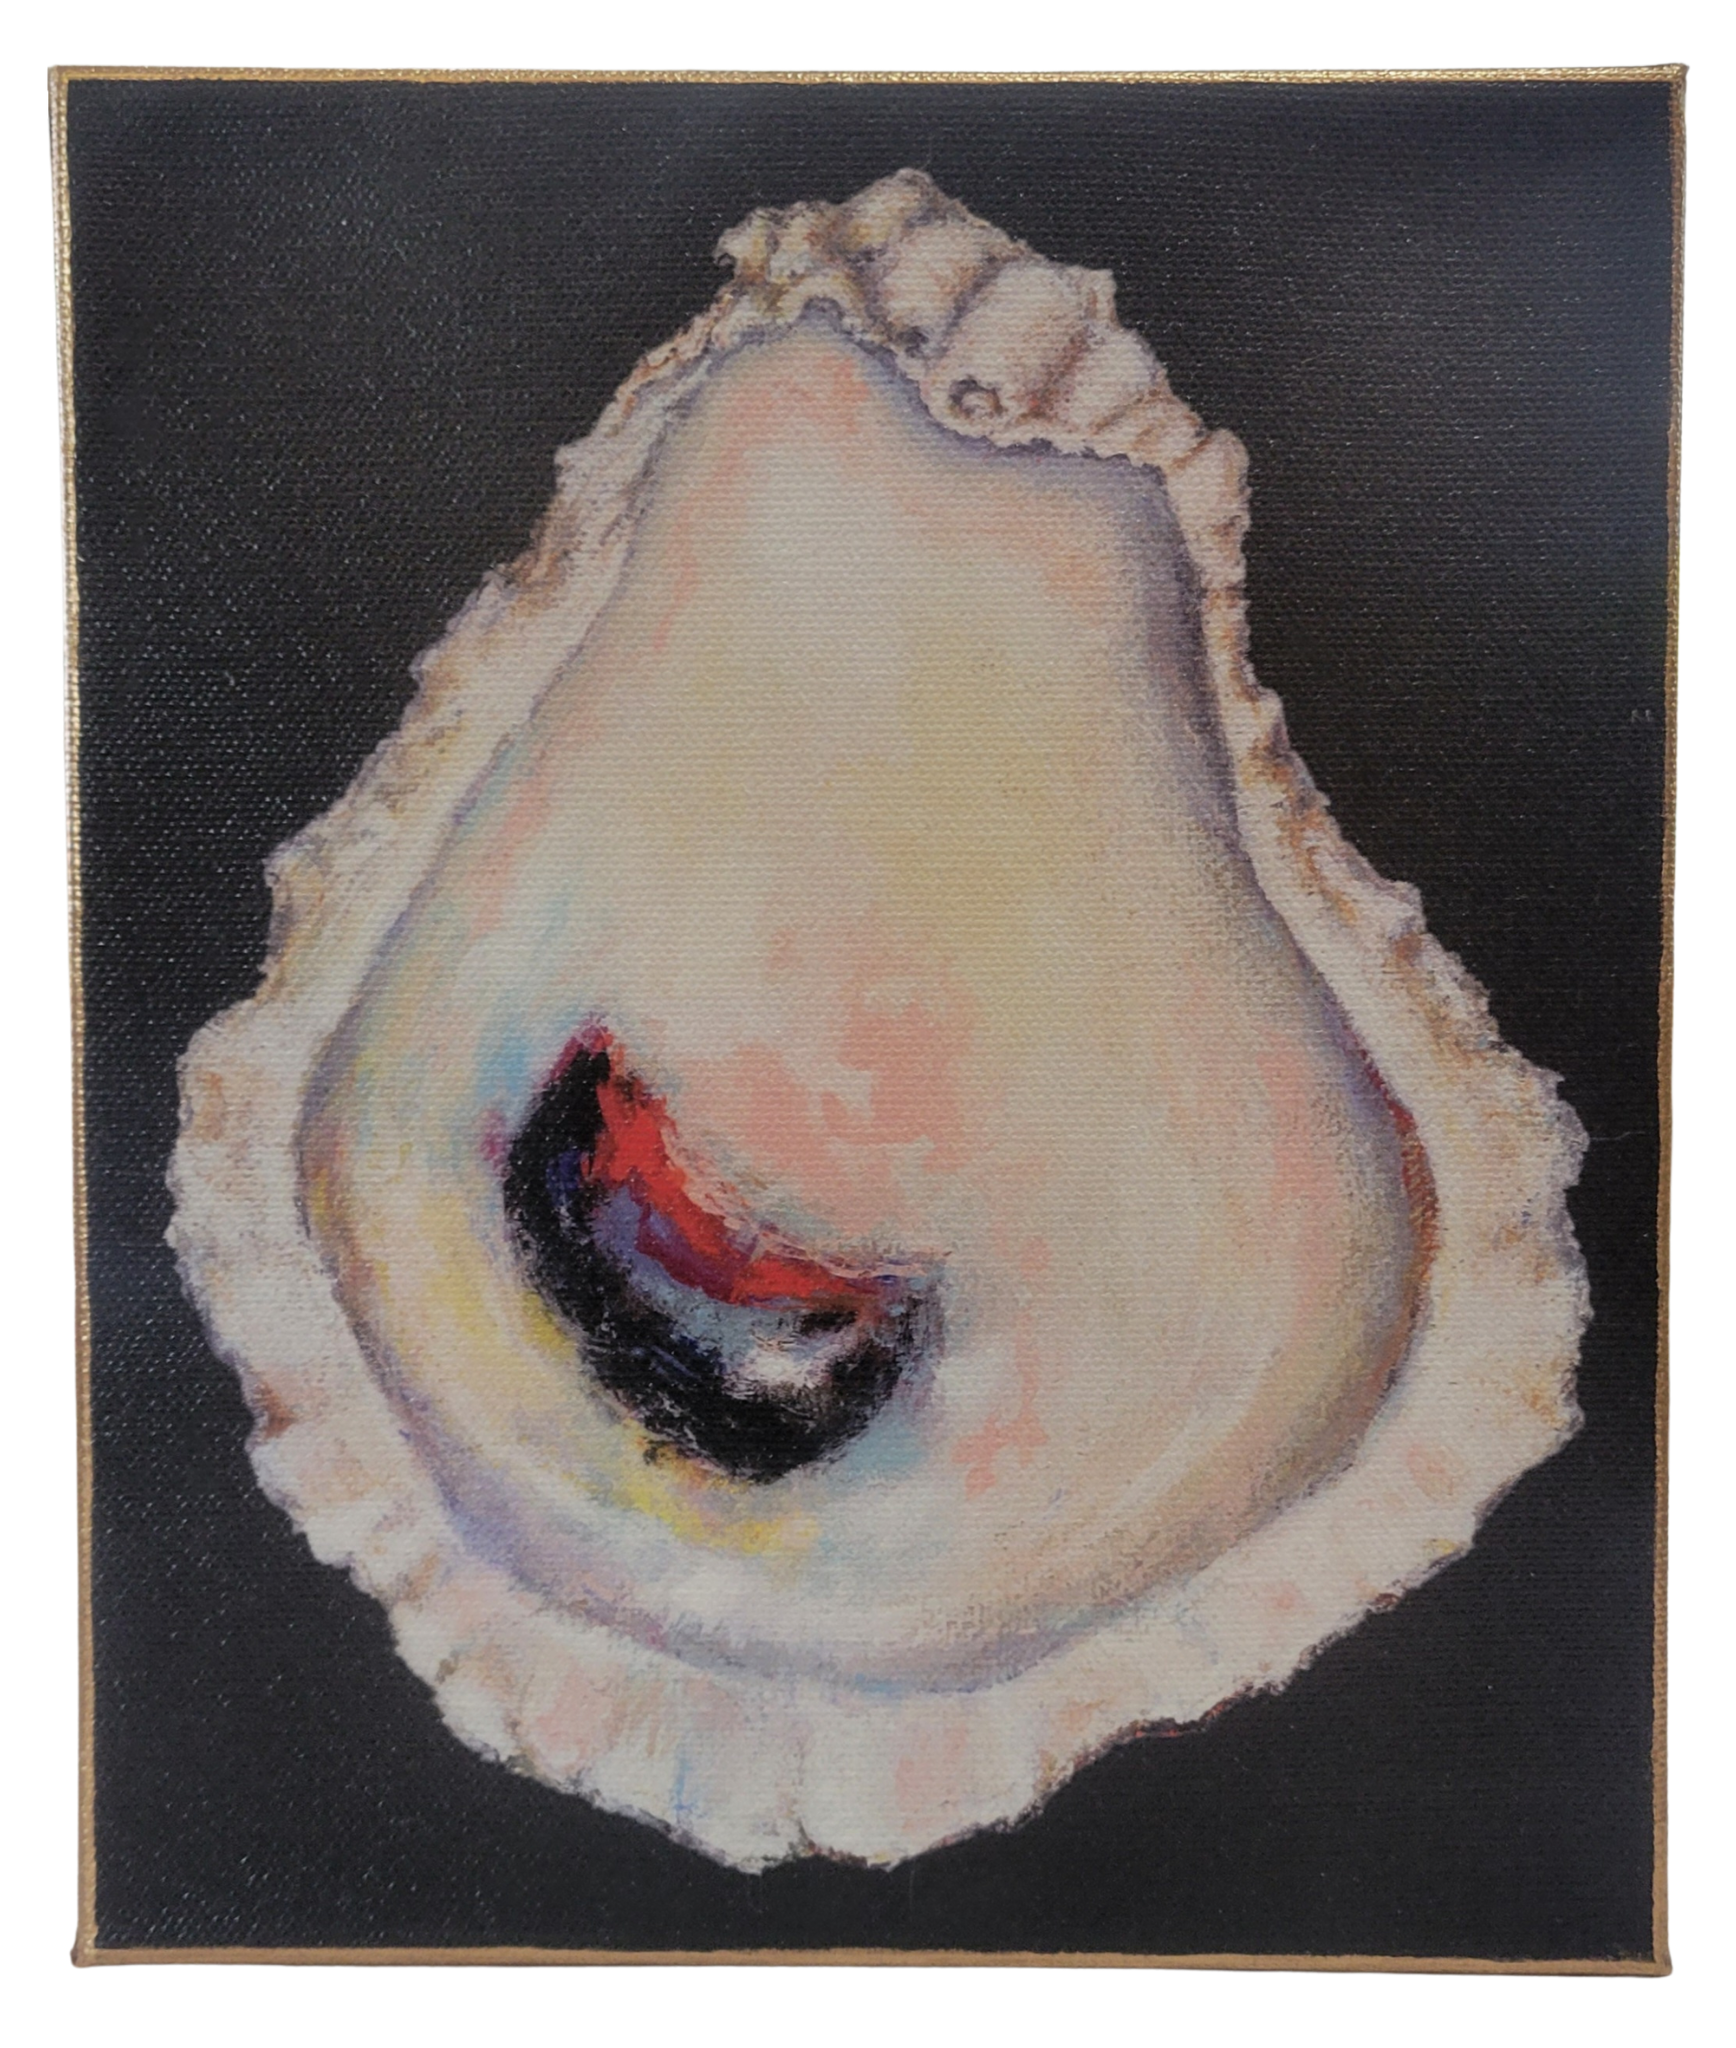 "Raw Oyster" Gallery Wrapped Canvas Reproduction 8x10